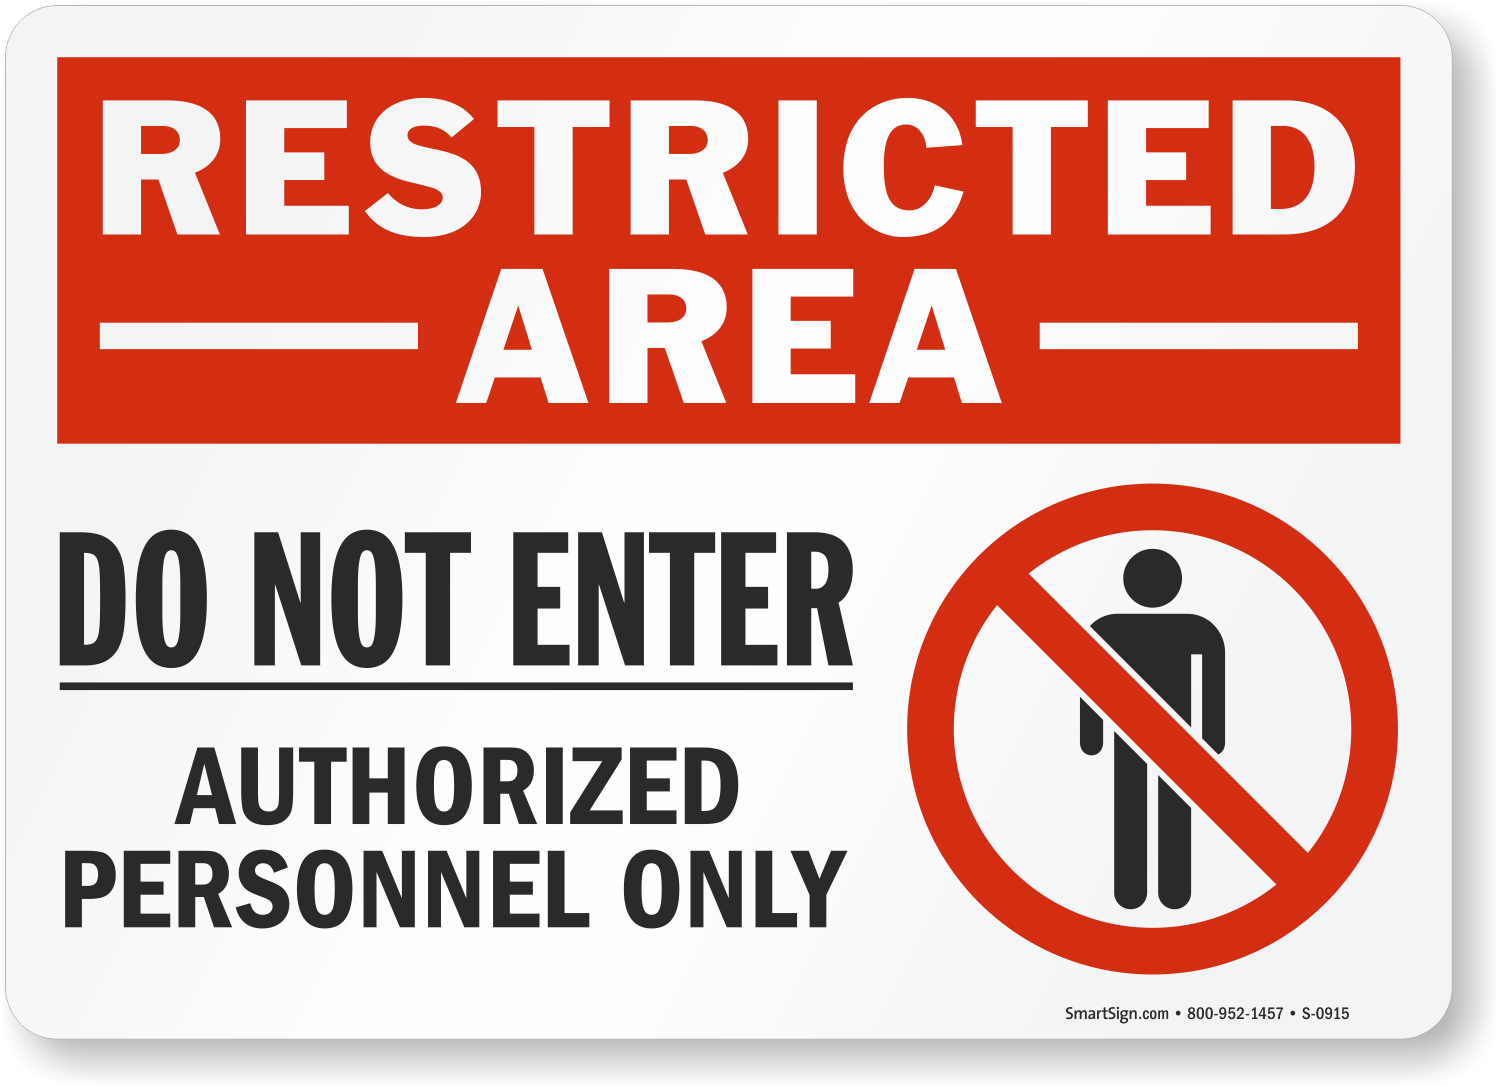 Allowed posting. Restricted area sign. Authorized personnel only. Предупреждение restricted. Do not enter authorized personnel only.